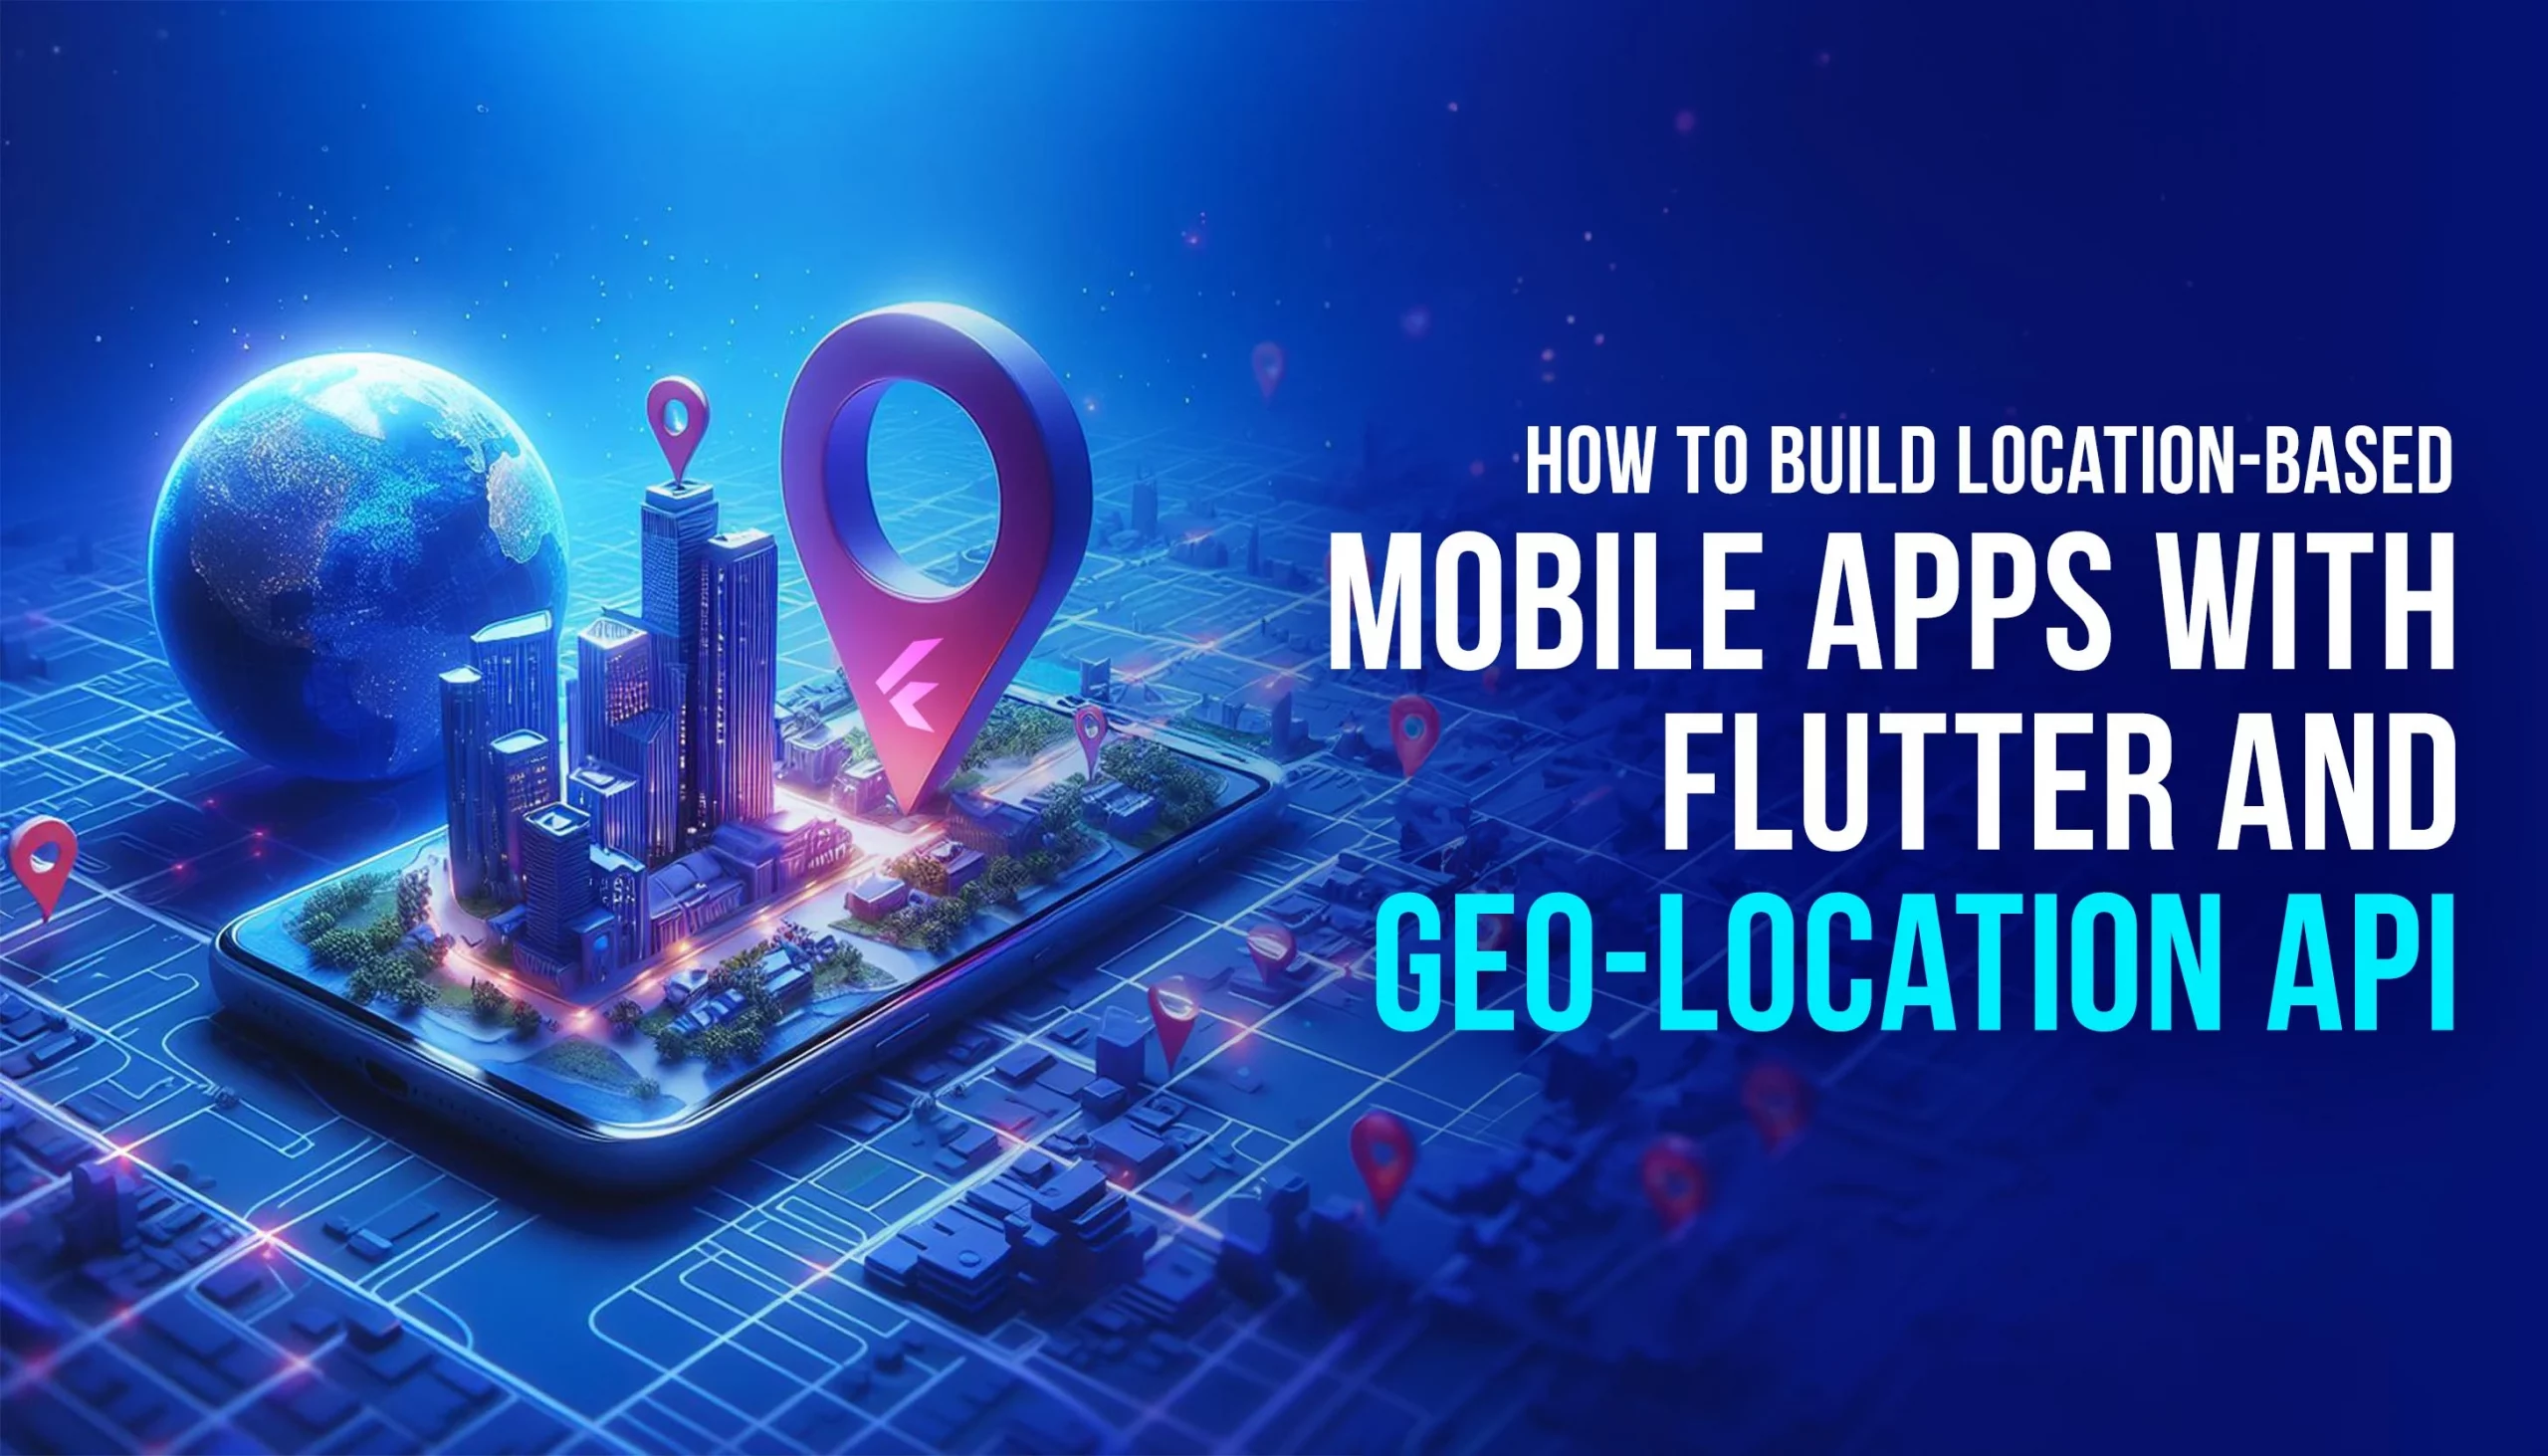 How to Build Location-Based Mobile Apps With Flutter and Geo-Location API